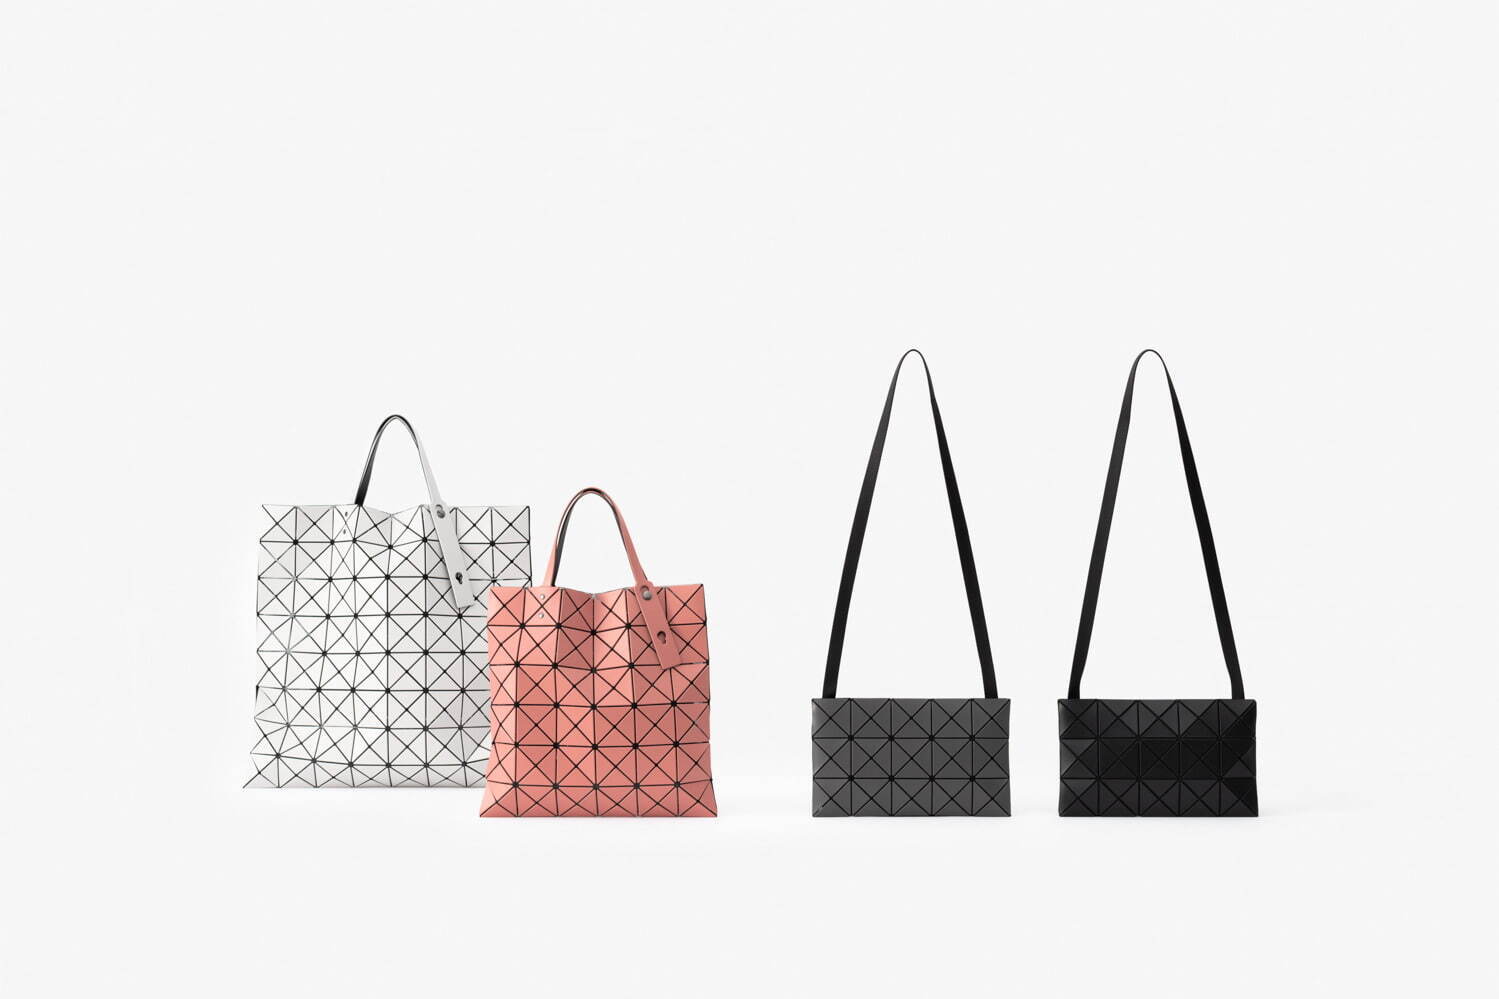 「LUCENT MATTE」Large tote 55,000円、Tote 40,700円、Shoulder 36,300円